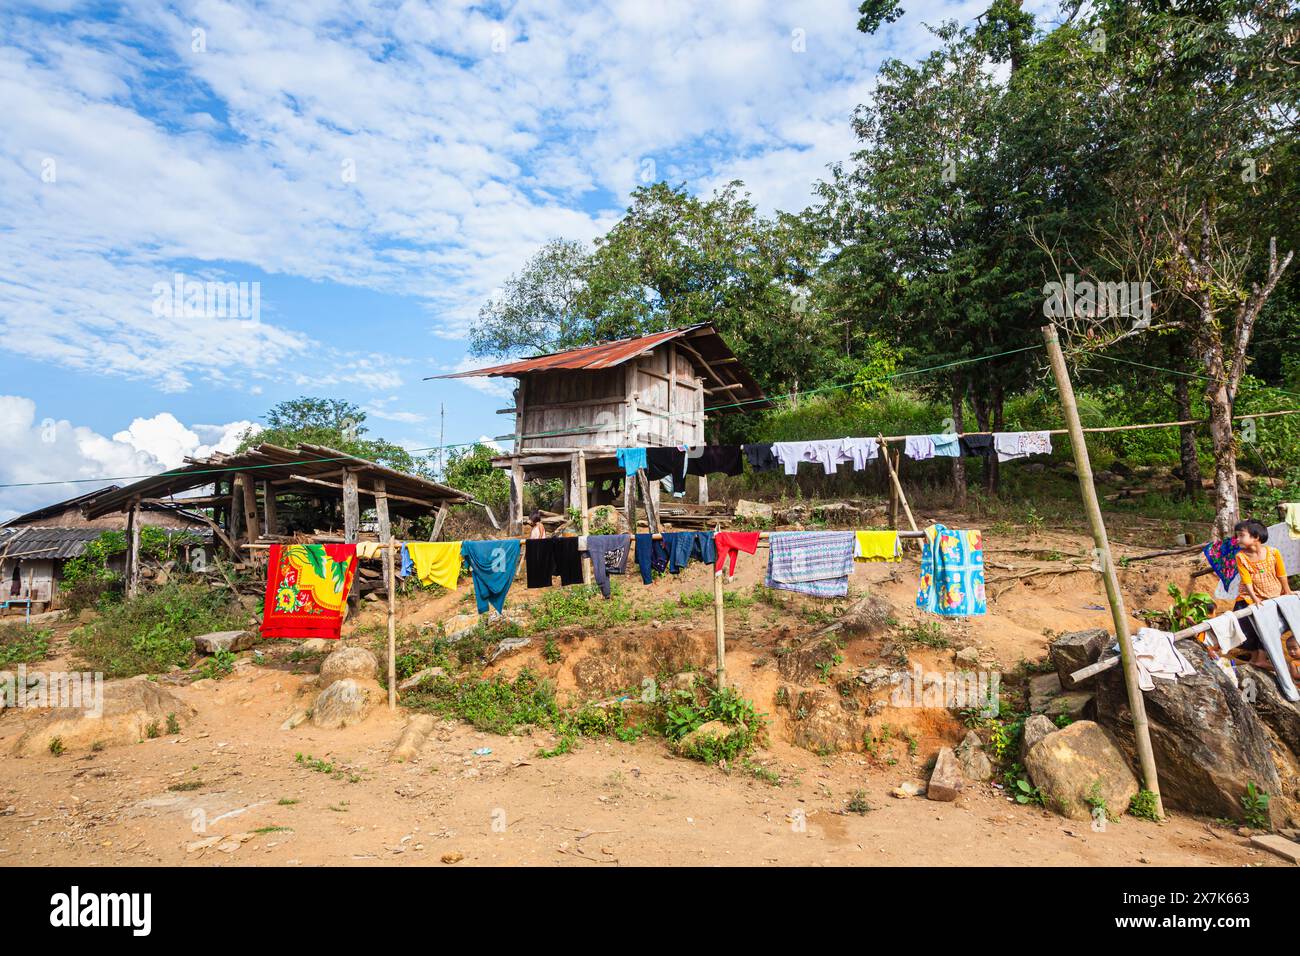 View of a Lahu village with washing hanging out to dry near Lanjia Lodge in Chiang Khong in Chiang Rai province, northern Thailand Stock Photo